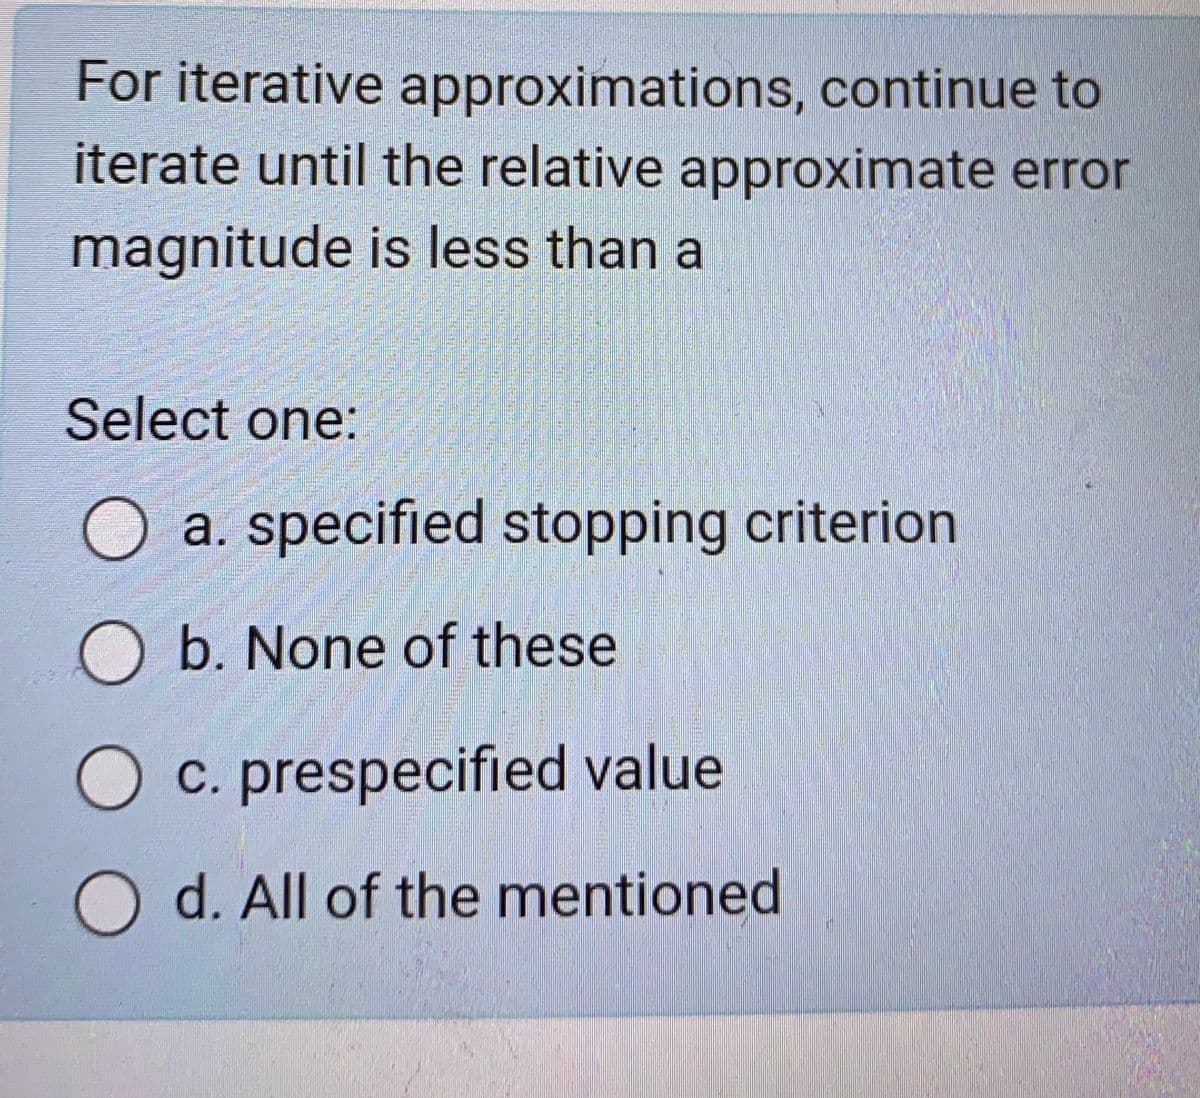 For iterative approximations, continue to
iterate until the relative approximate error
magnitude is less than a
Select one:
a. specified stopping criterion
O b. None of these
c. prespecified value
Od. All of the mentioned
